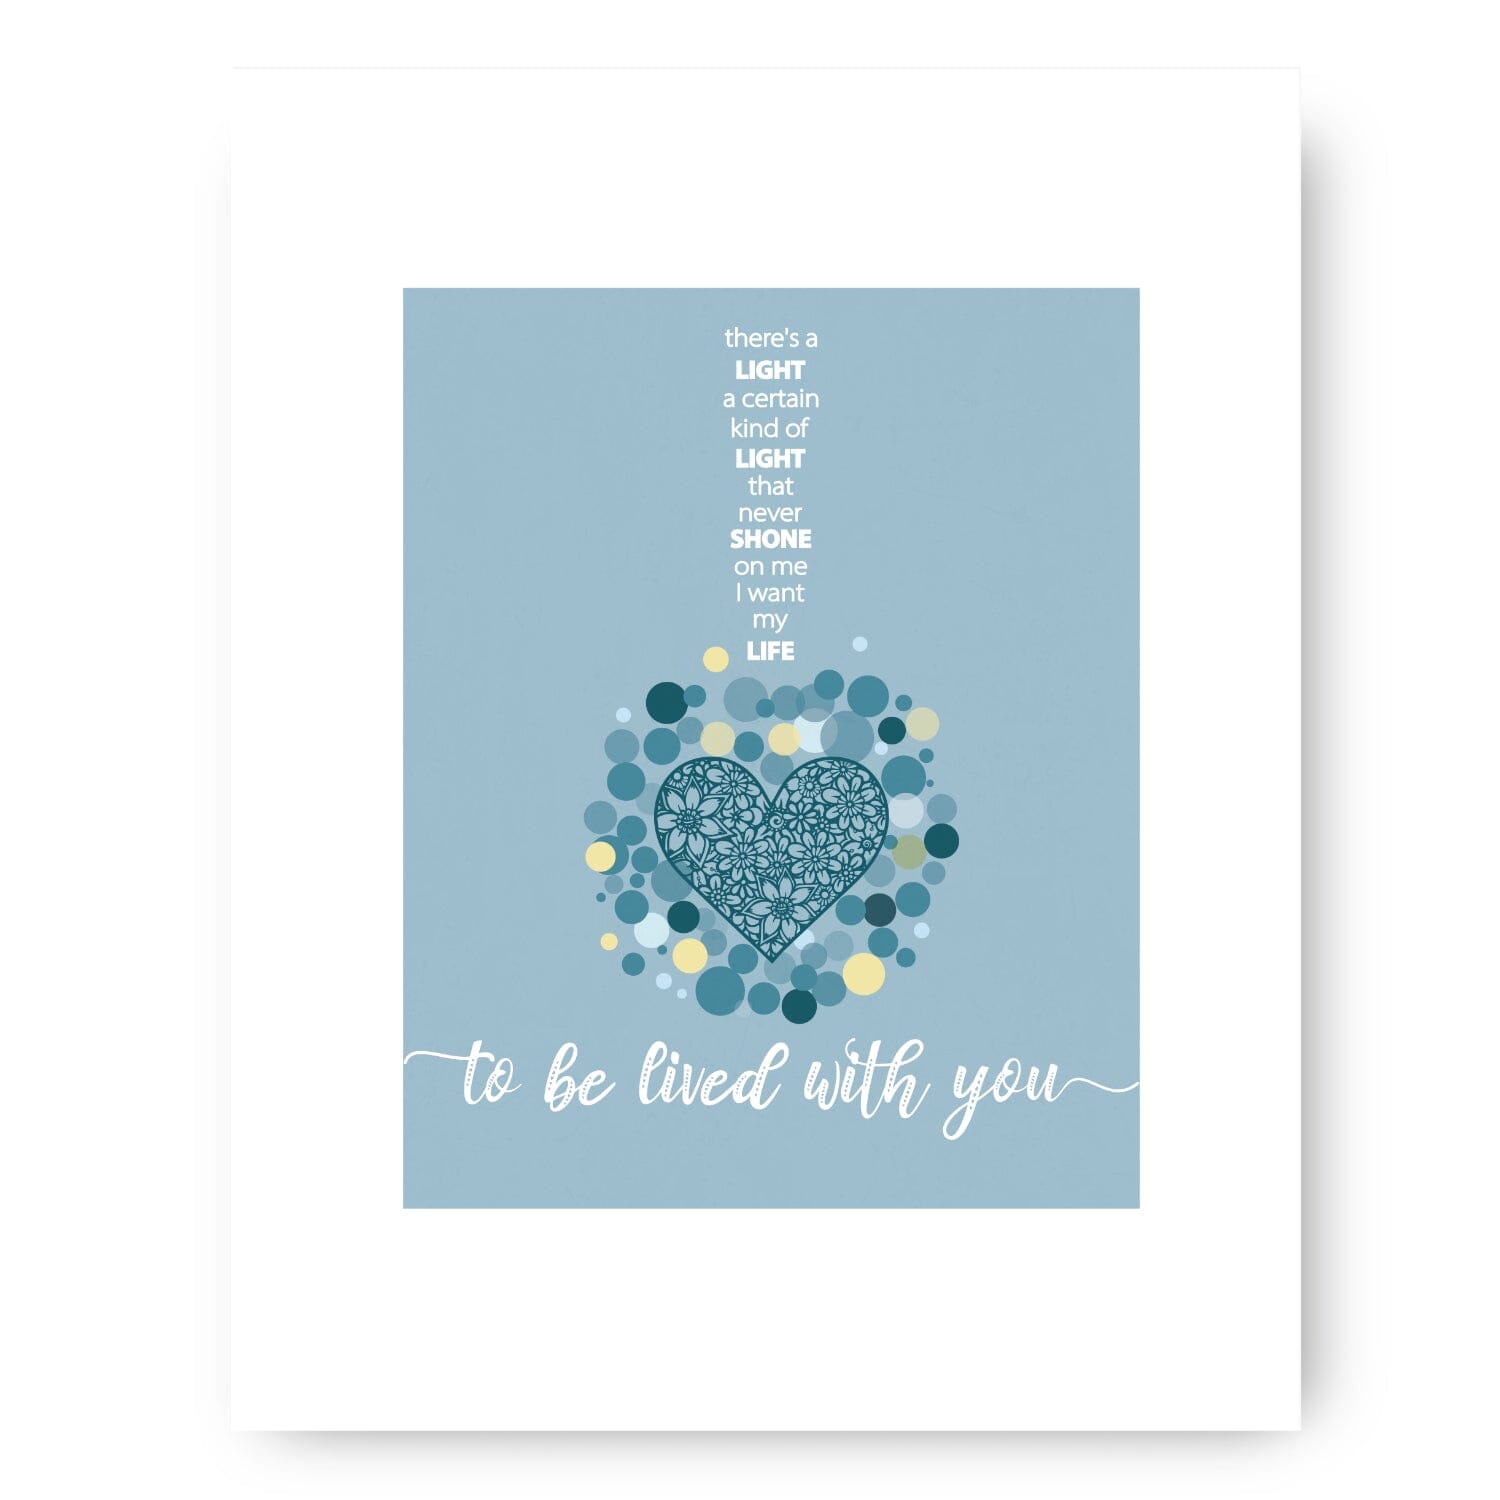 To Love Somebody by the Bee Gees - 60s Song Lyric Art Print Song Lyrics Art Song Lyrics Art 8x10 White Matted Print 